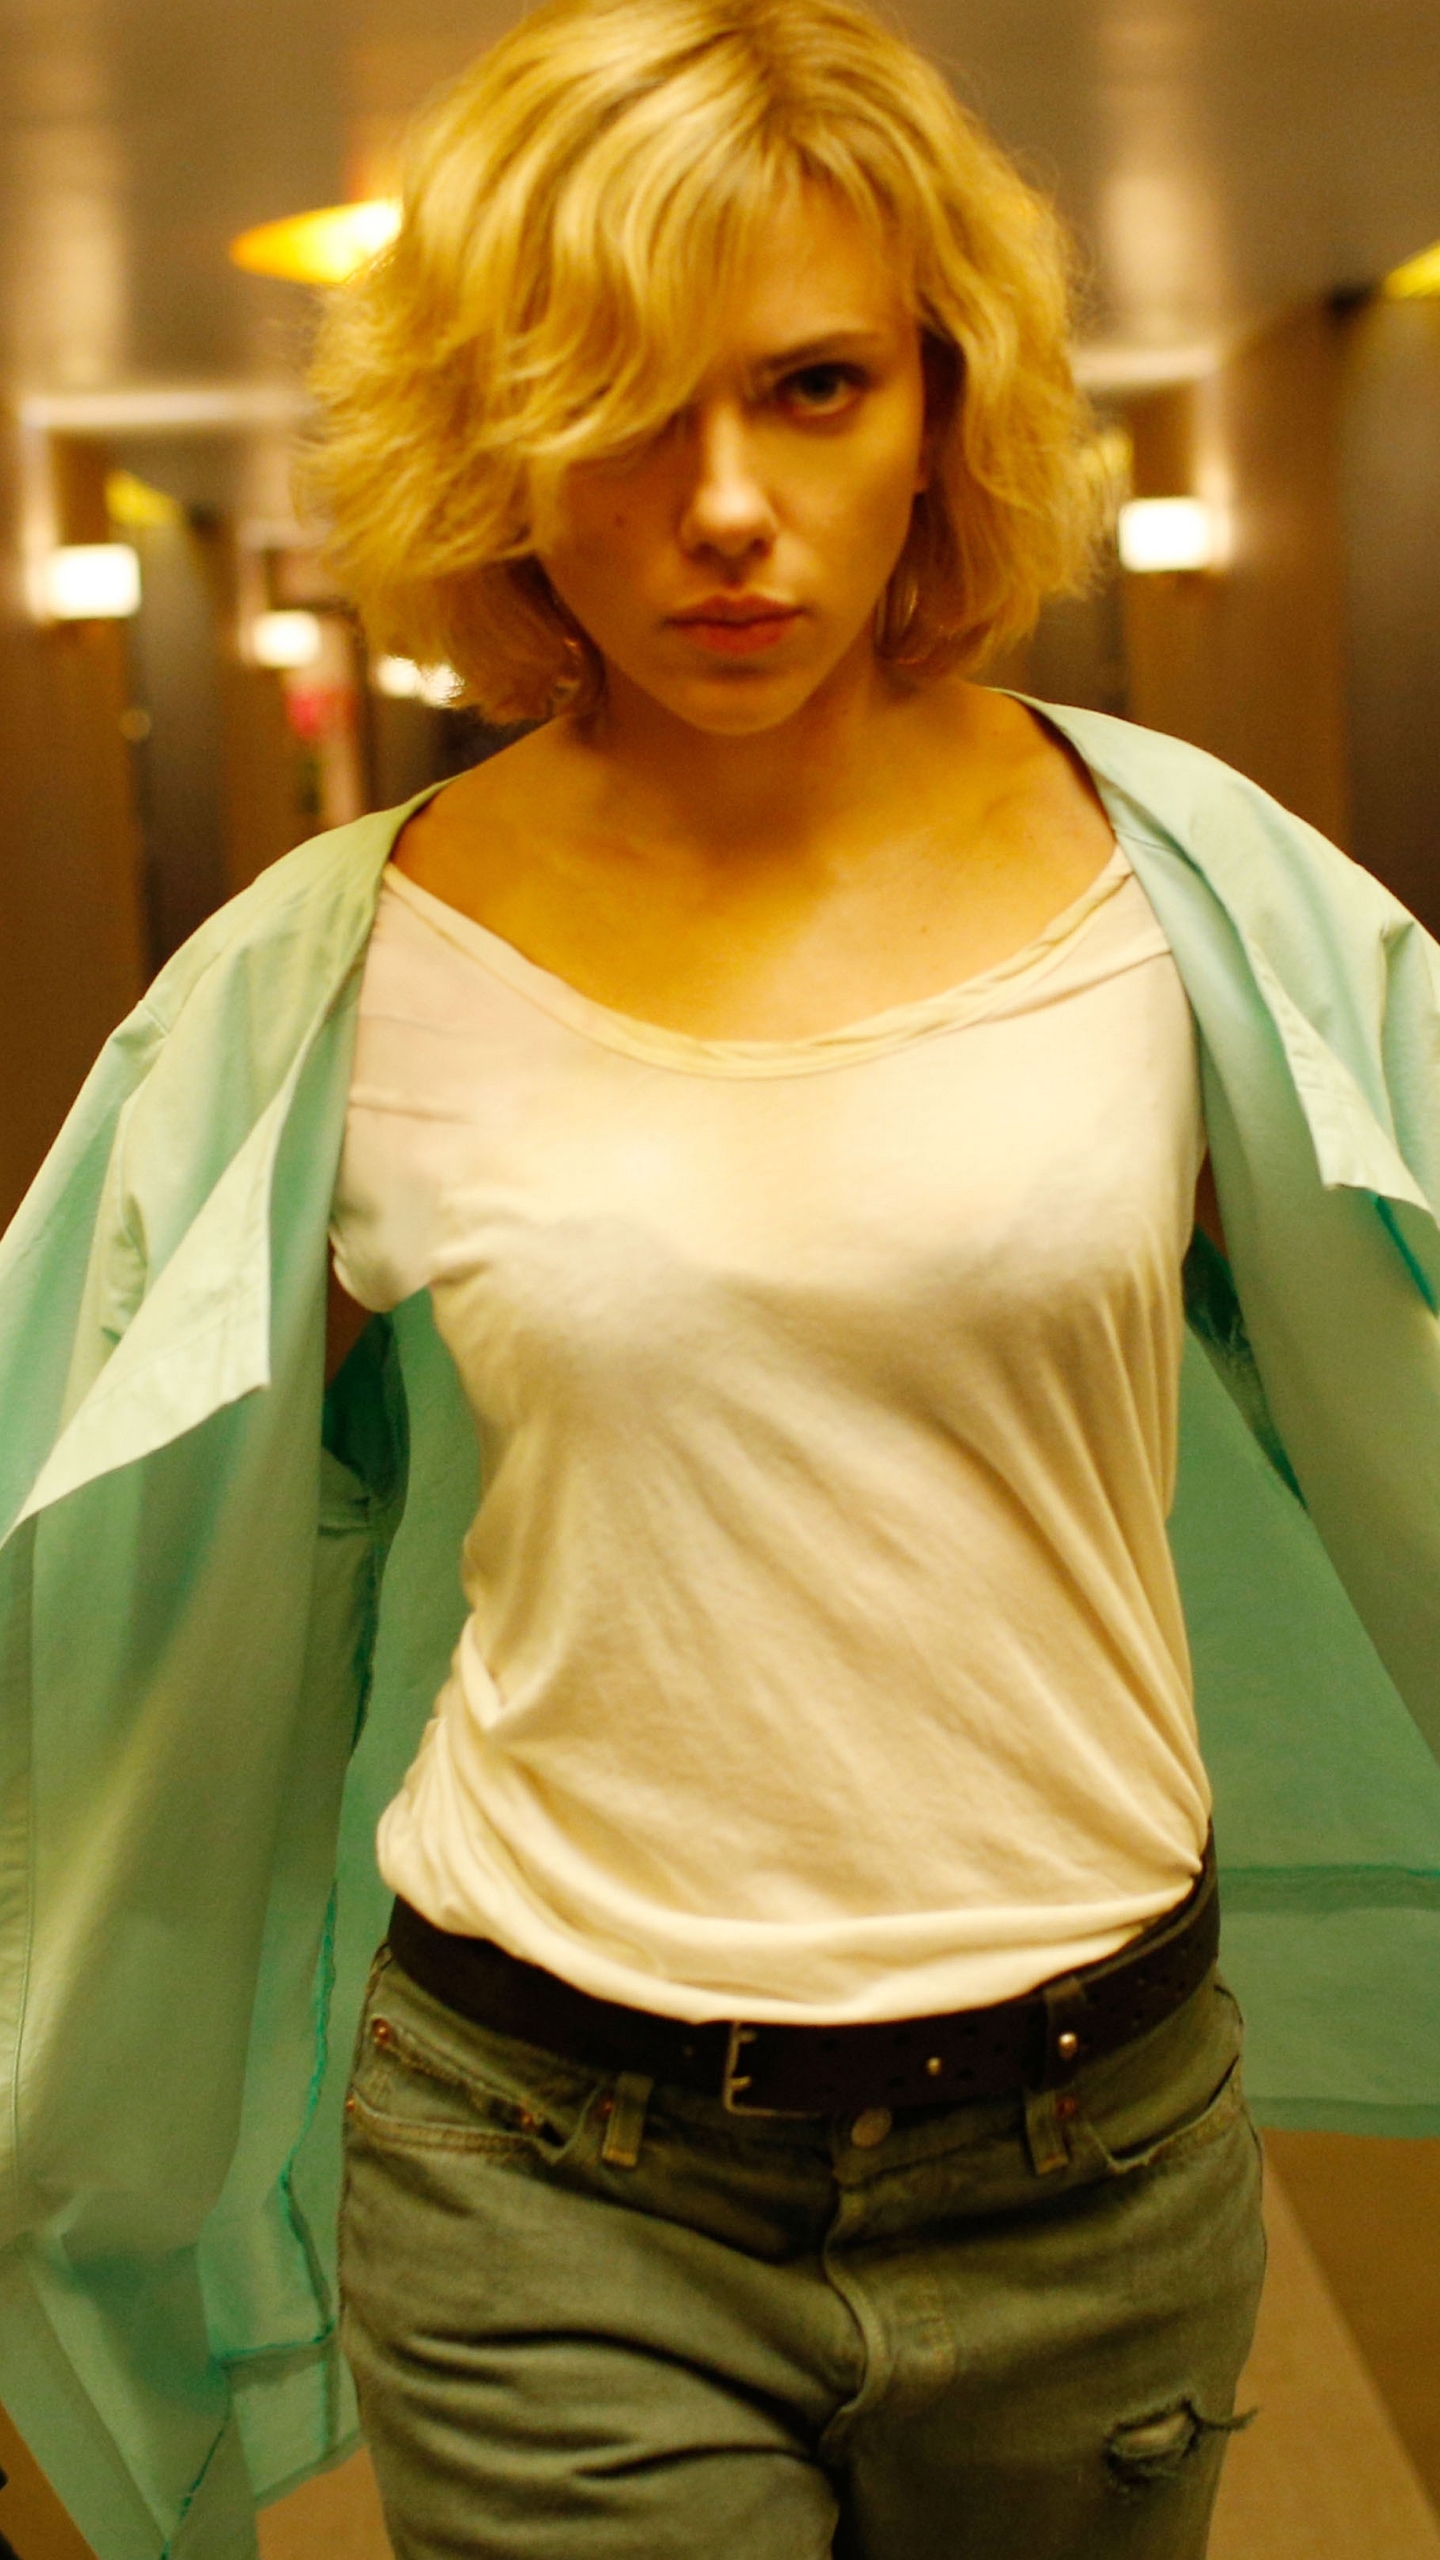 Mobile wallpaper: Scarlett Johansson, Movie, Lucy, 1200757 download the picture for free.